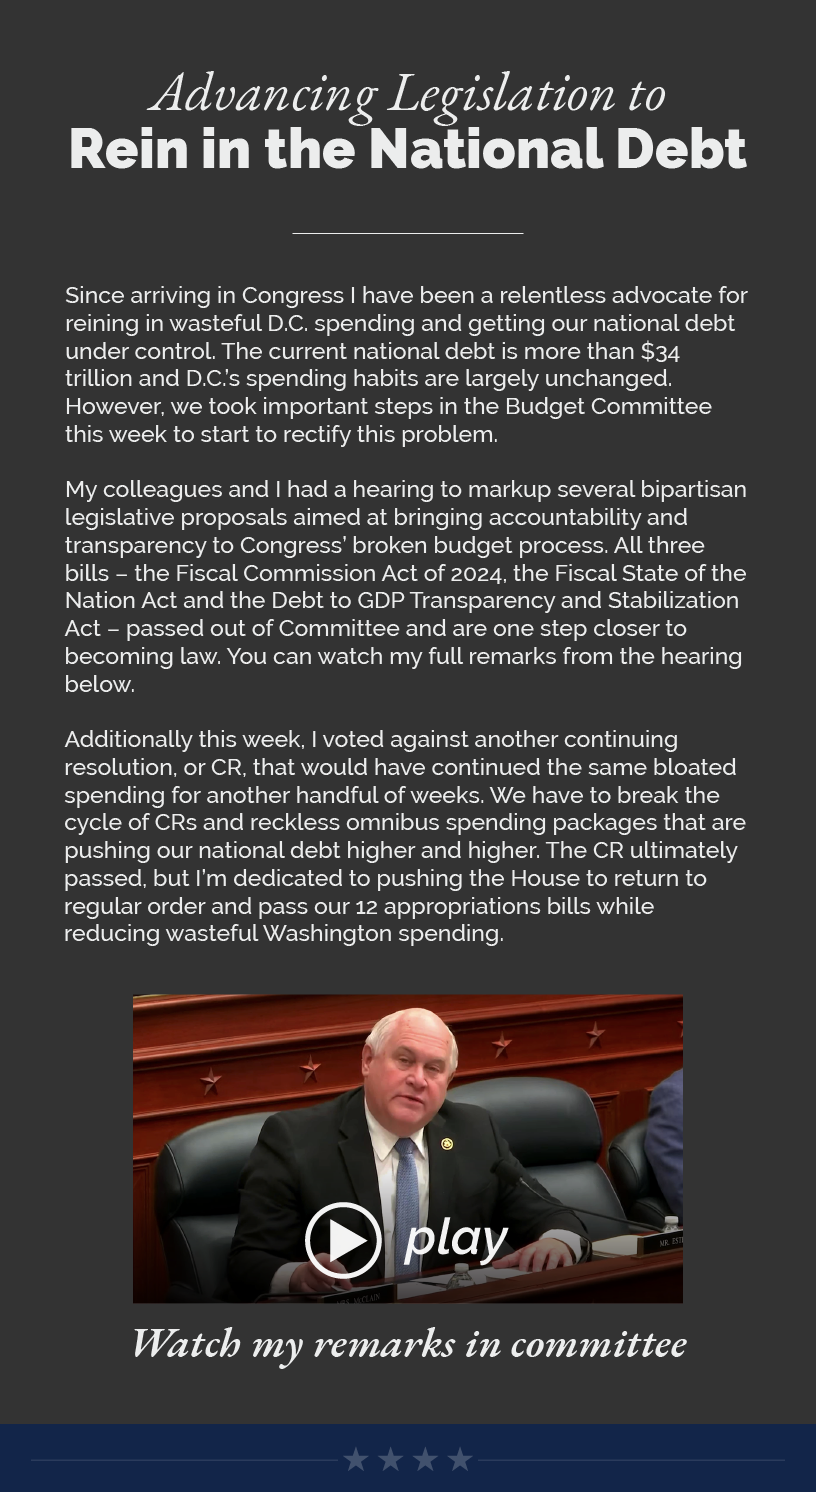 Headline: Advancing Legislation to Rein in the National Debt. Since arriving in Congress I have been a relentless advocate for reining in wasteful D.C. spending and getting our national debt under control. The current national debt is more than $34 trillion and D.C.’s spending habits are largely unchanged. However, we took important steps in the Budget Committee this week to start to rectify this problem.  My colleagues and I had a hearing to markup several bipartisan legislative proposals aimed at bringing accountability and transparency to Congress’ broken budget process. All three bills – the Fiscal Commission Act of 2024, the Fiscal State of the Nation Act and the Debt to GDP Transparency and Stabilization Act – passed out of Committee and are one step closer to becoming law. You can watch my full remarks from the hearing below.  Additionally this week, I voted against another continuing resolution, or CR, that would have continued the same bloated spending for another handful of weeks. We have to break the cycle of CRs and reckless omnibus spending packages that are pushing our national debt higher and higher. The CR ultimately passed, but I’m dedicated to pushing the House to return to regular order and pass our 12 appropriations bills while reducing wasteful Washington spending.  LINK: https://www.youtube.com/watch?v=__vee2Uhf2E